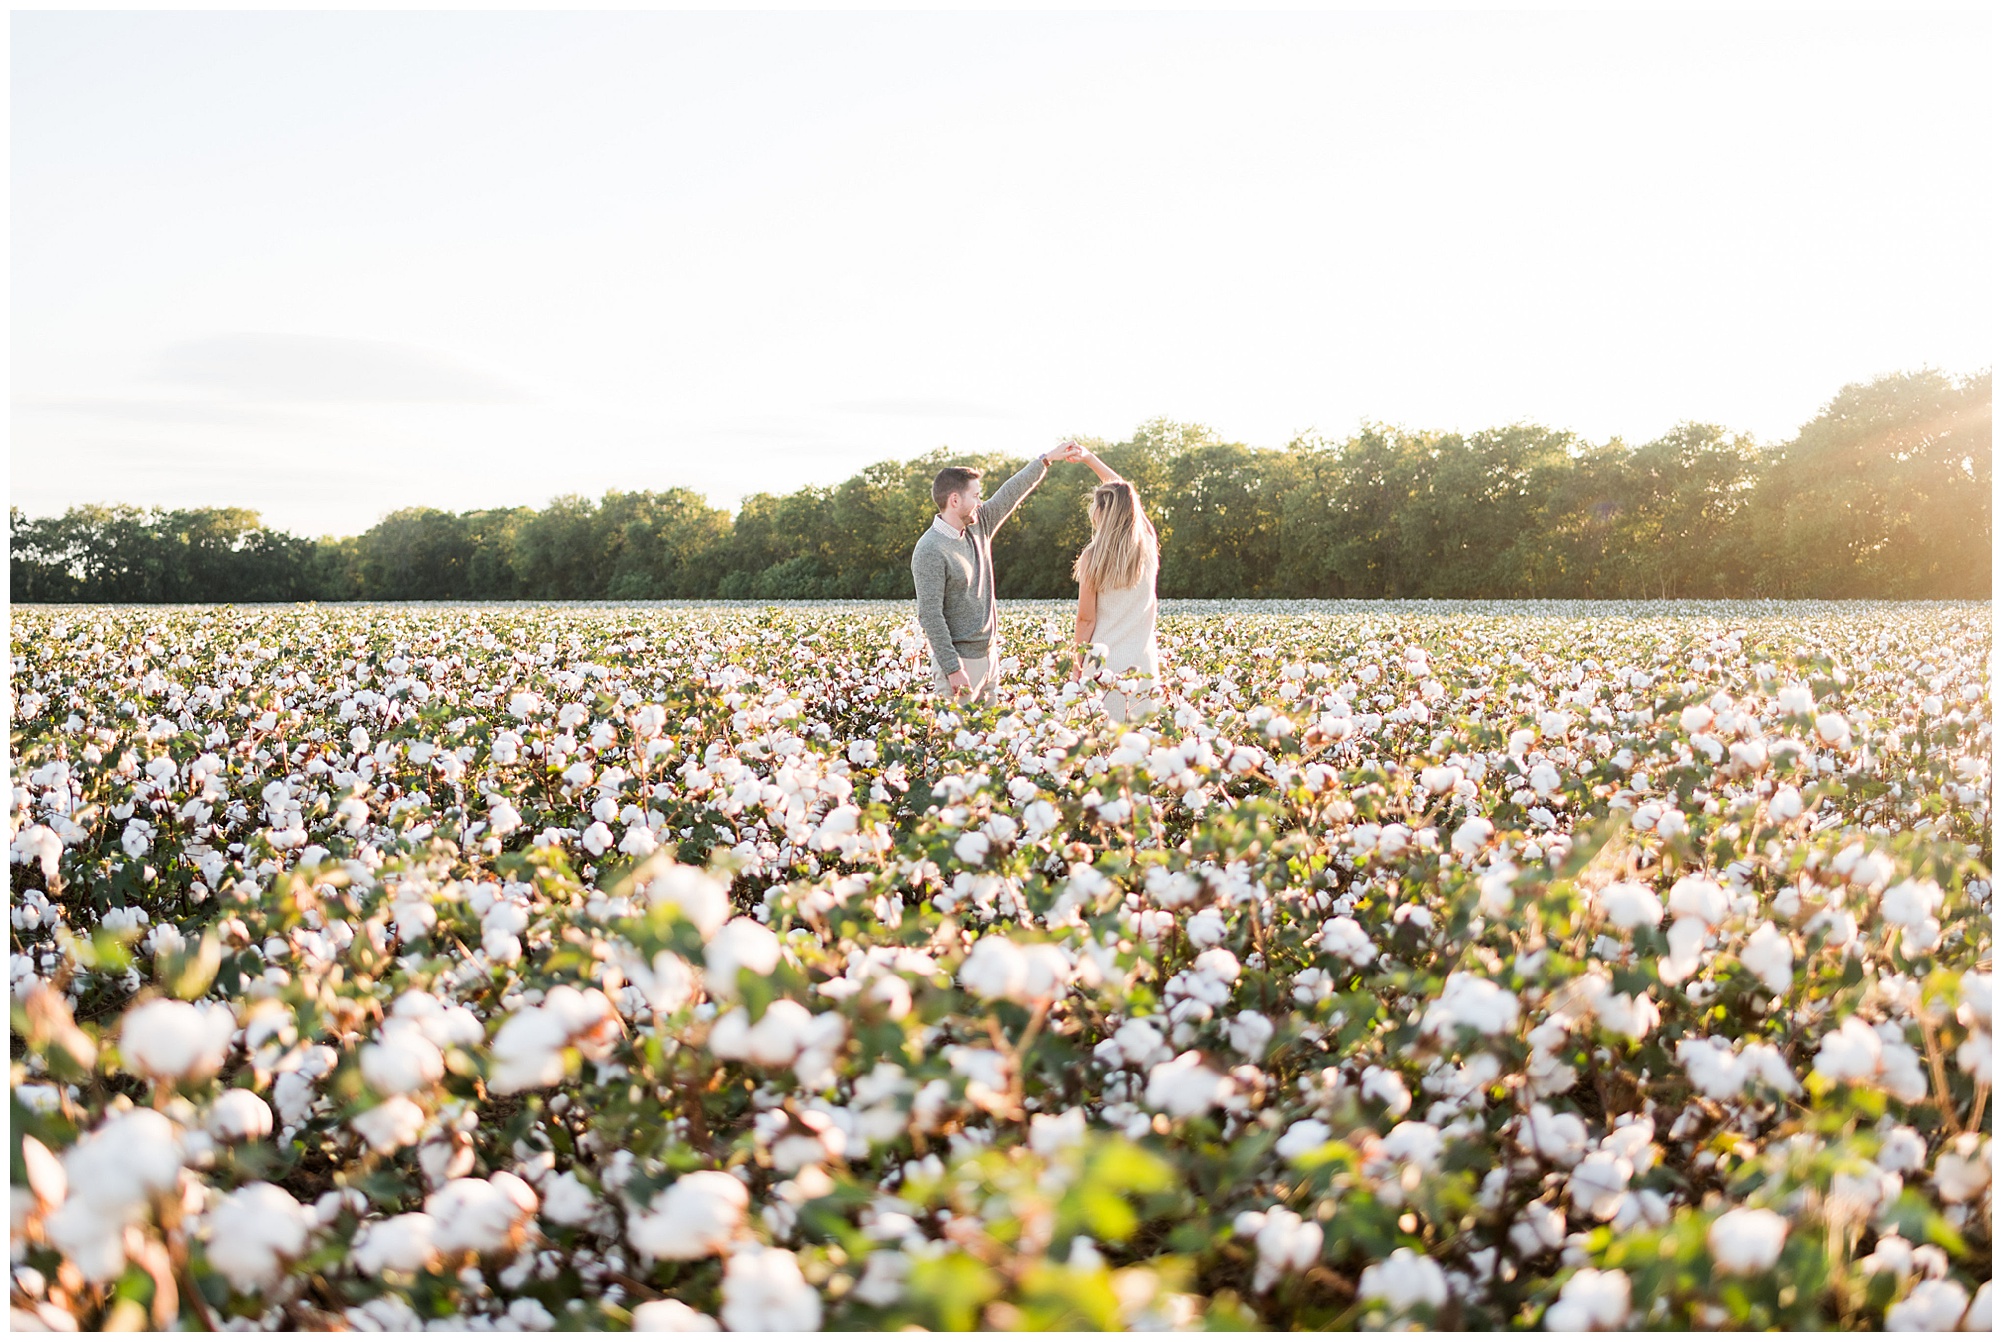 charles city virginia engagement session in cotton fields. in the fall by rva wedding photographer, sarah & dave photography